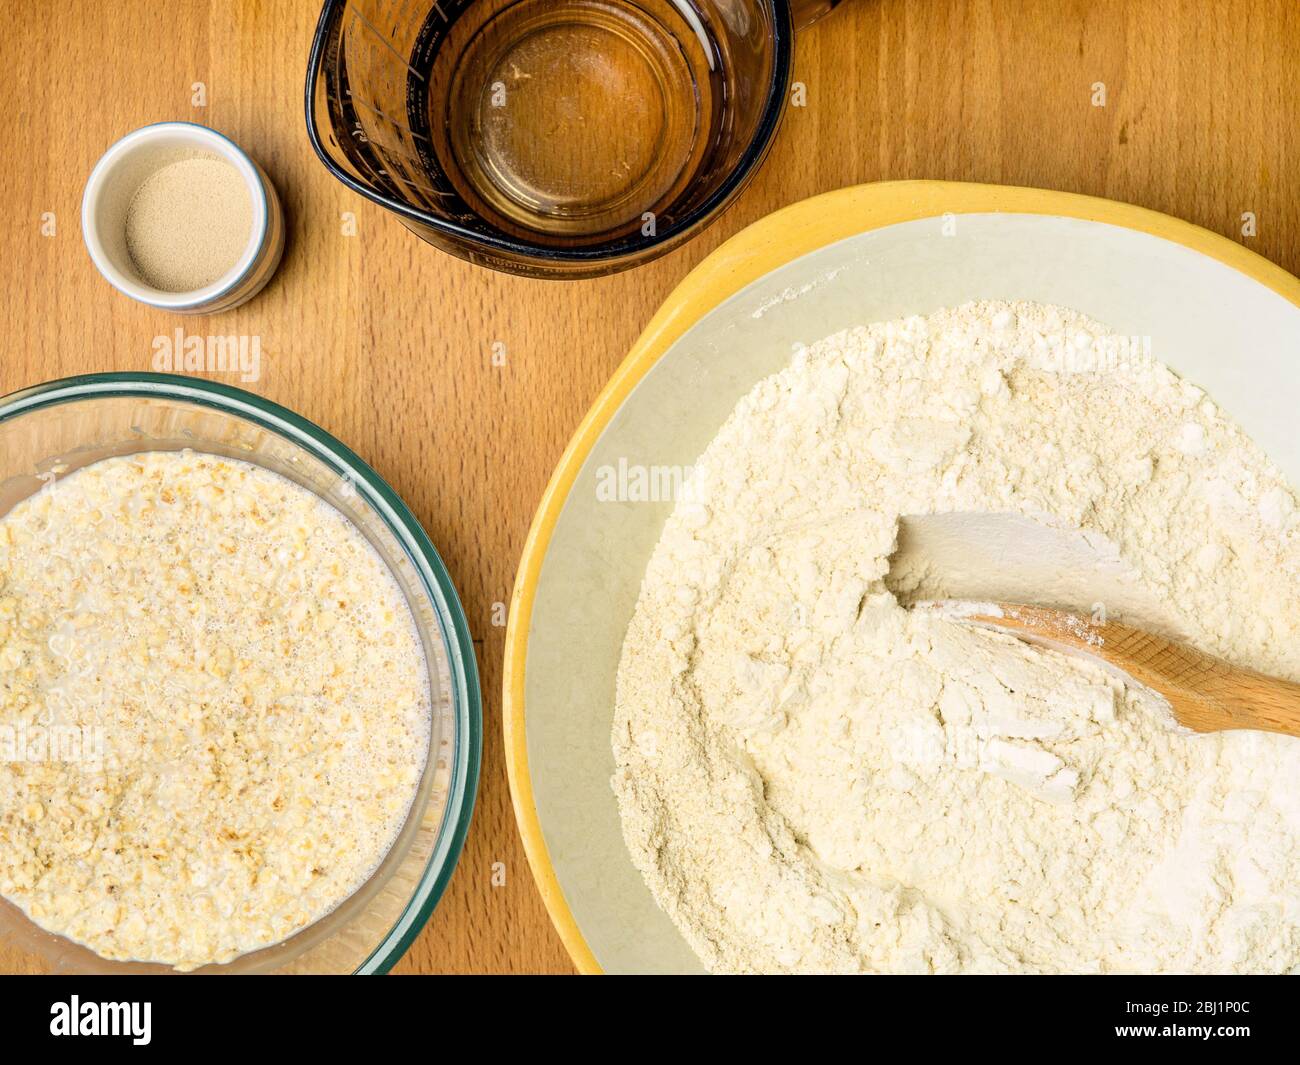 Mixing oat flour with strong white bread flour while soaking oats in oat milk with yeast and water for making oat bread Stock Photo